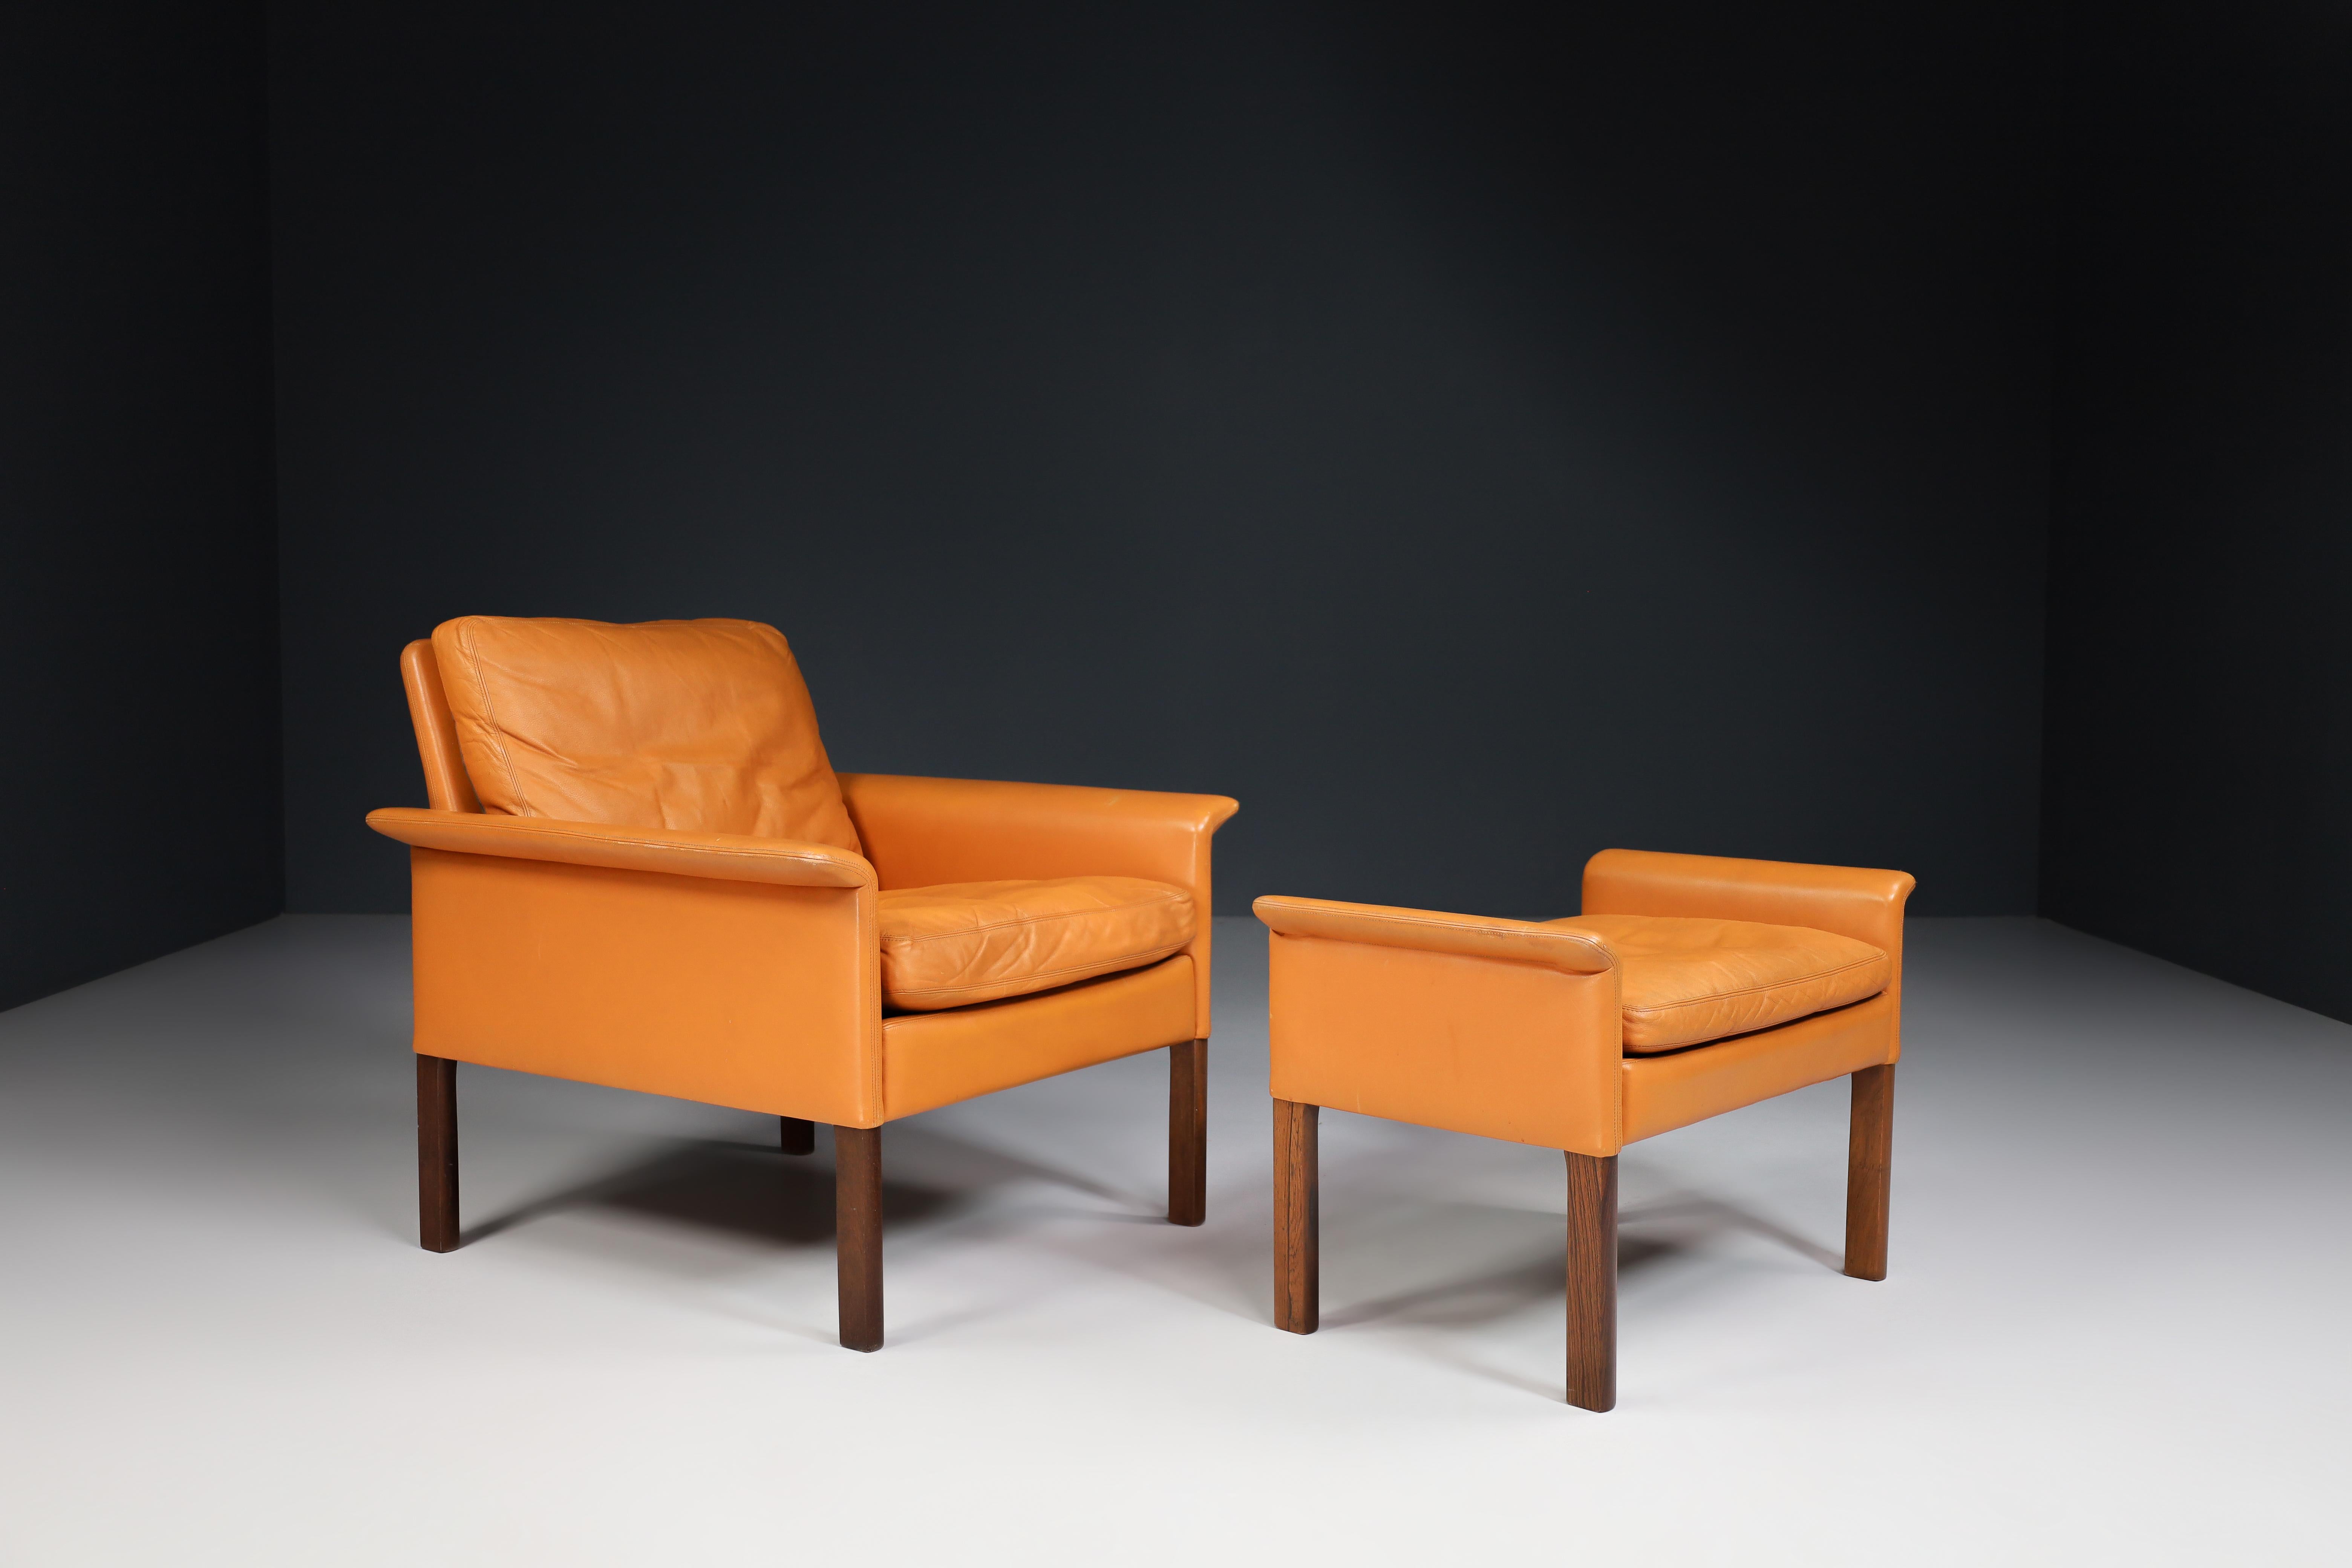 Hans Olsen for C/S Møbler, lounge chair and ottoman in walnut, leather, Denmark, 1960s

Hans Olsen for C/S Møbler, lounge chair and ottoman in walnut, leather, Denmark, designed in 1960, made from walnut and upholstered in fine leather. Made with